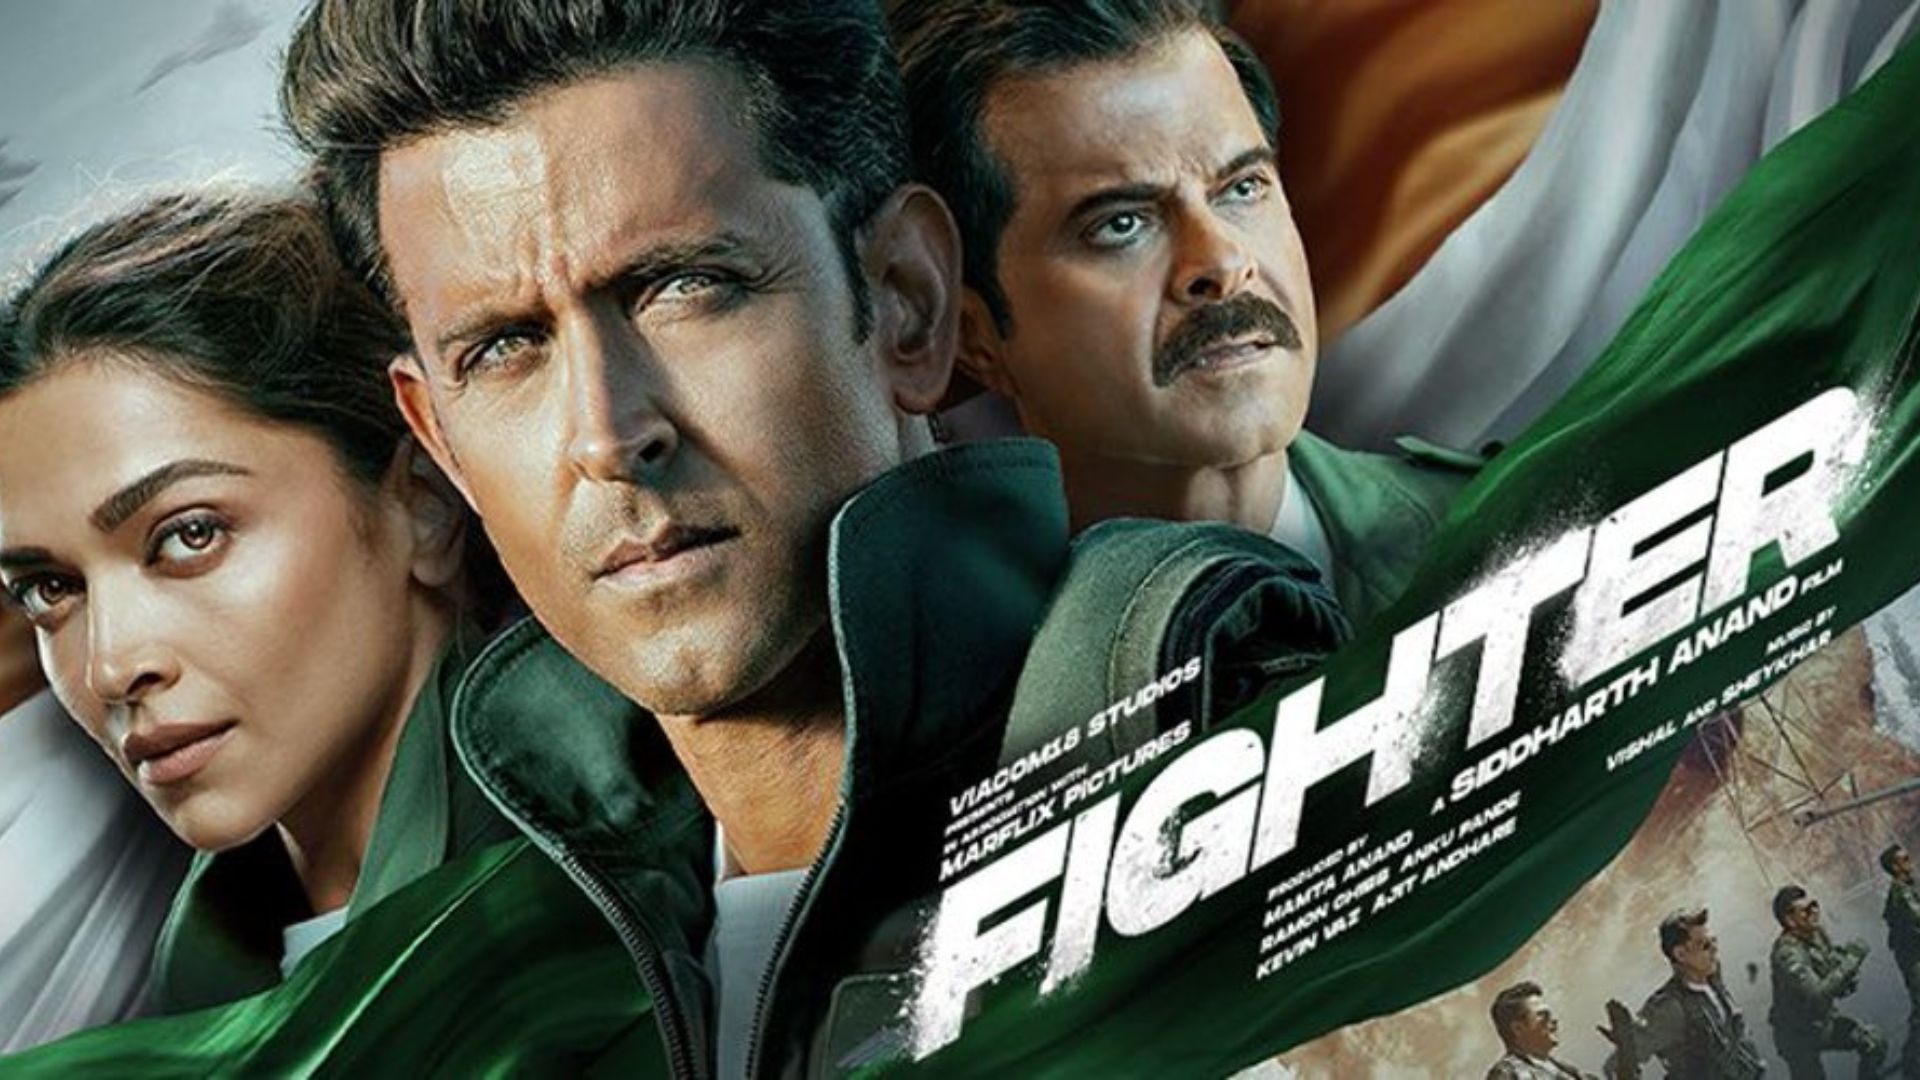 Fighter Box Office Collection Update: There has been a decline within the box office collection of Fighter film